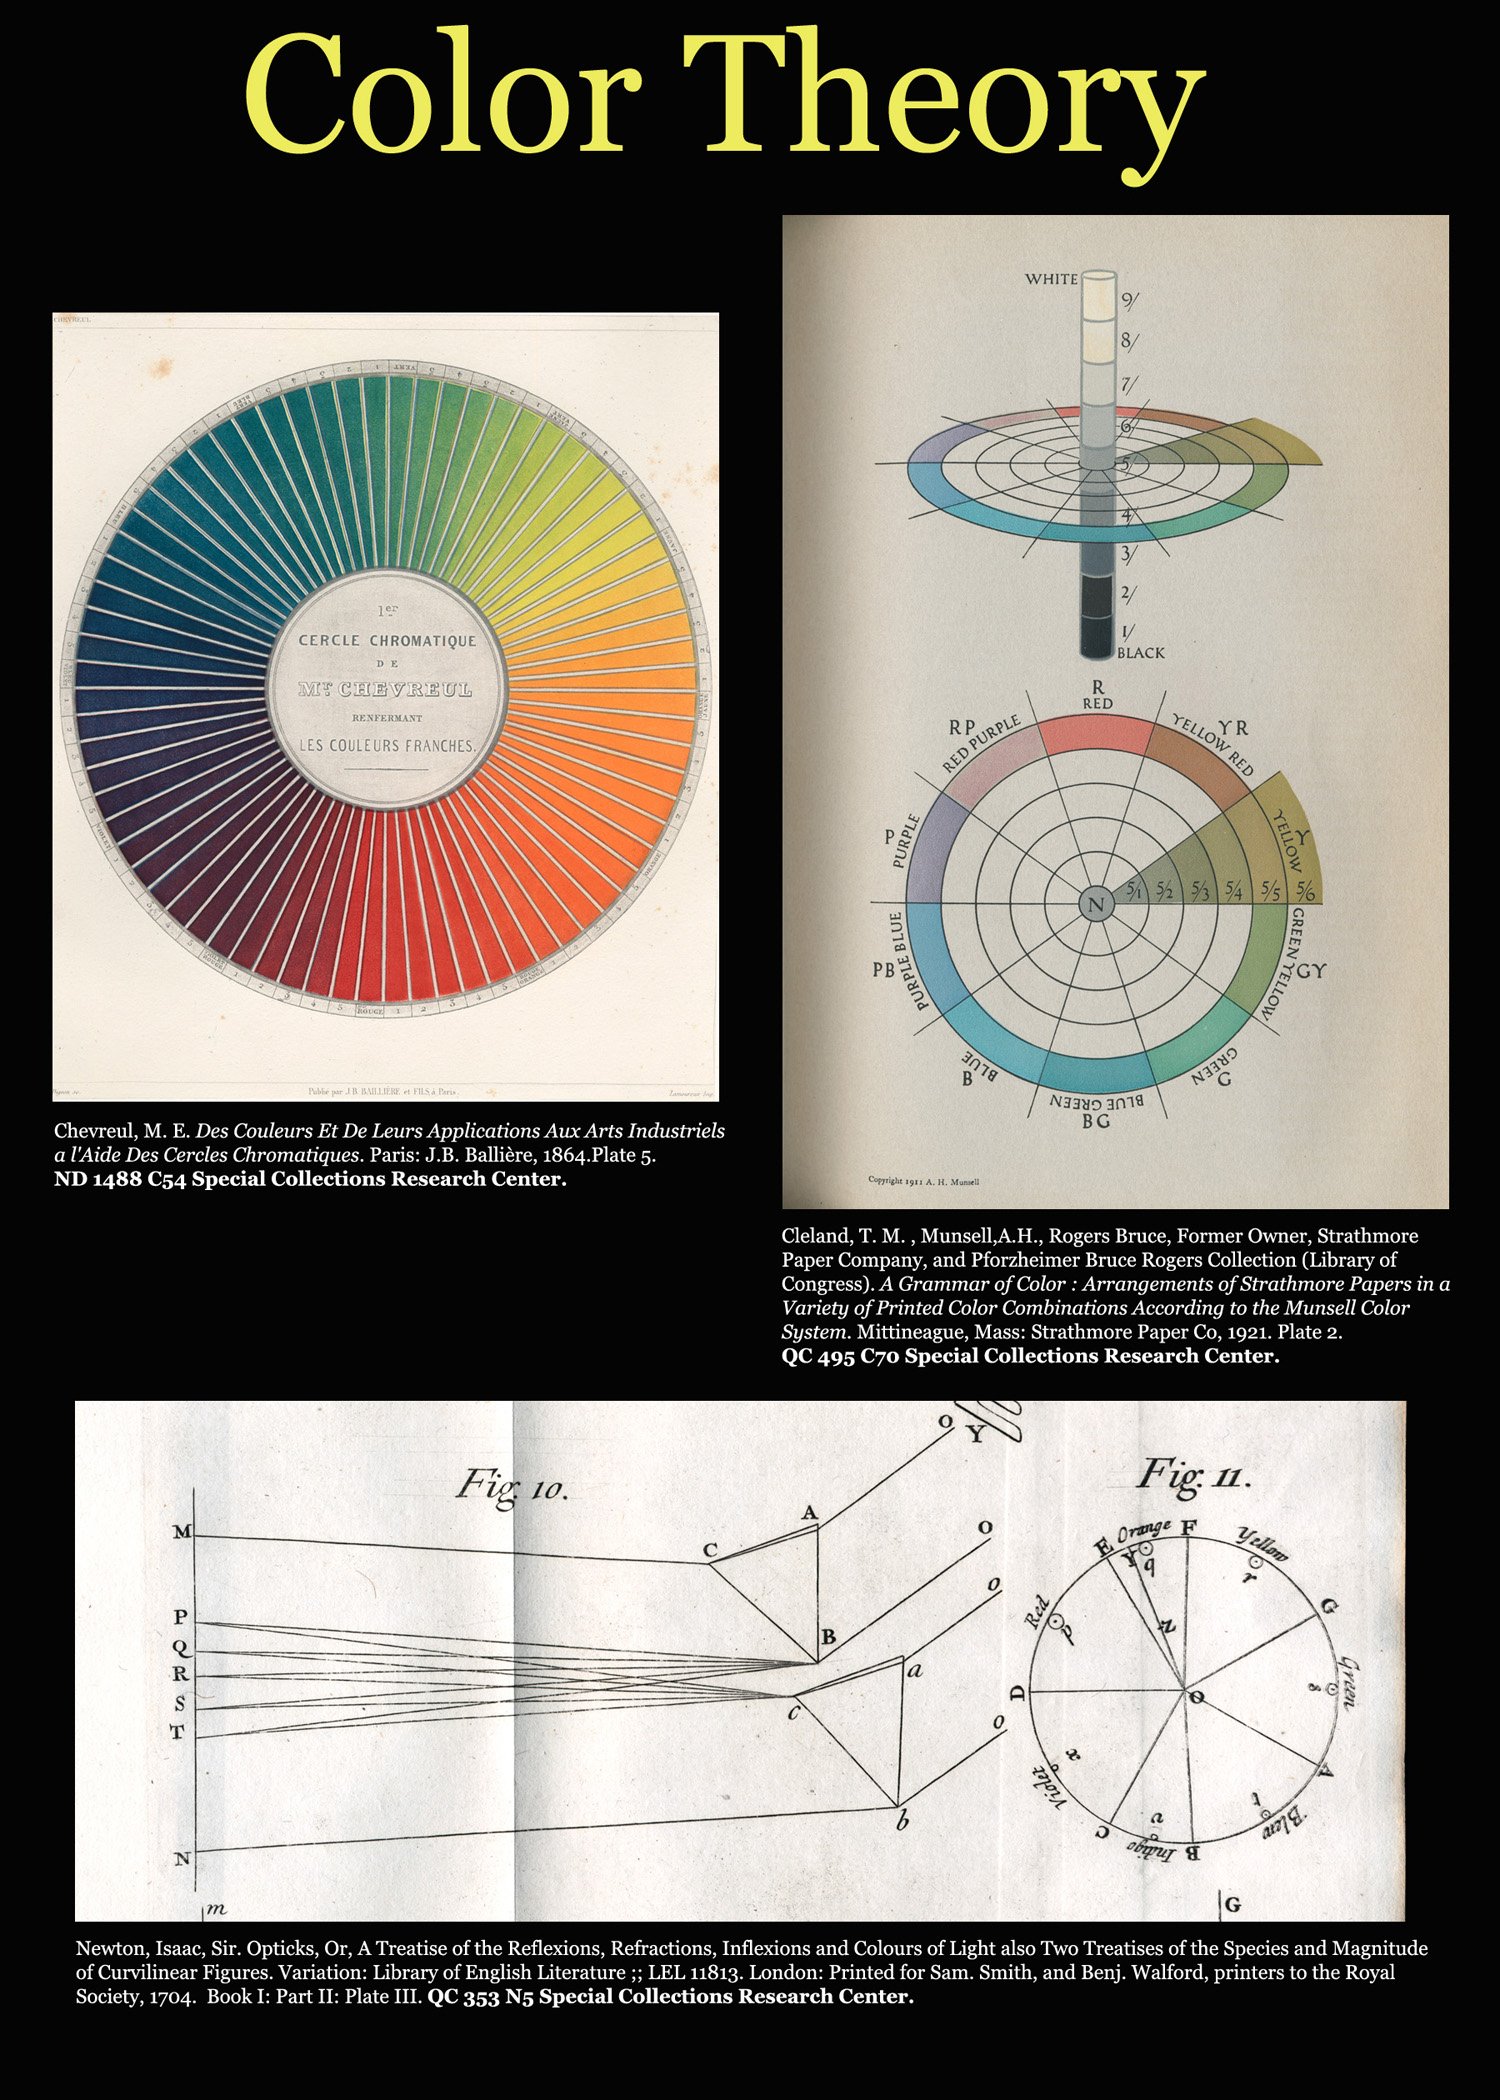 Color Theory - The Origins of Color - The University of Chicago